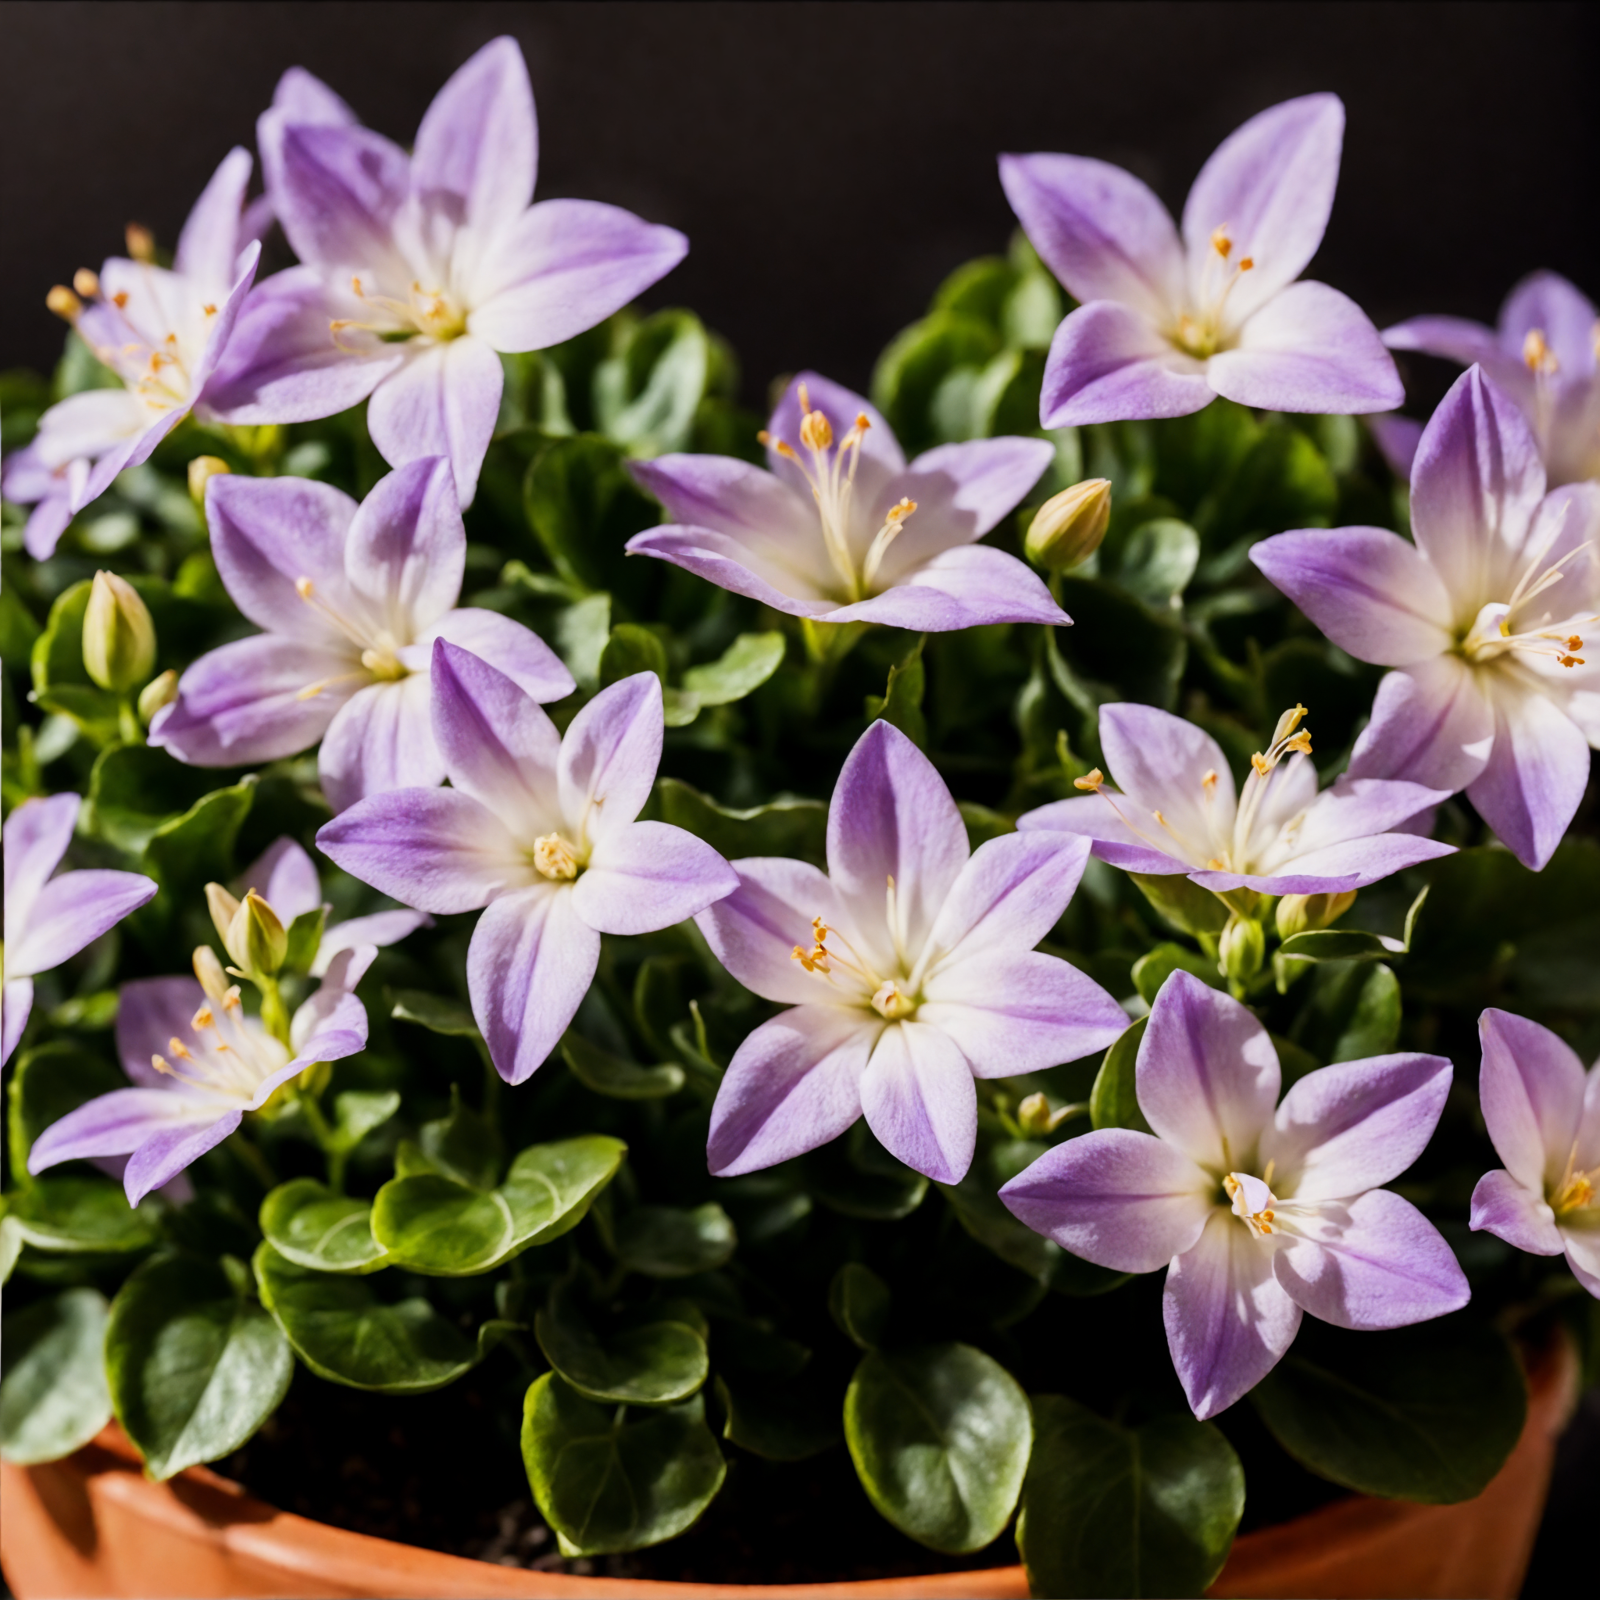 Campanula isophylla, star-shaped purple flowers in a bowl, with clear lighting against a dark background.